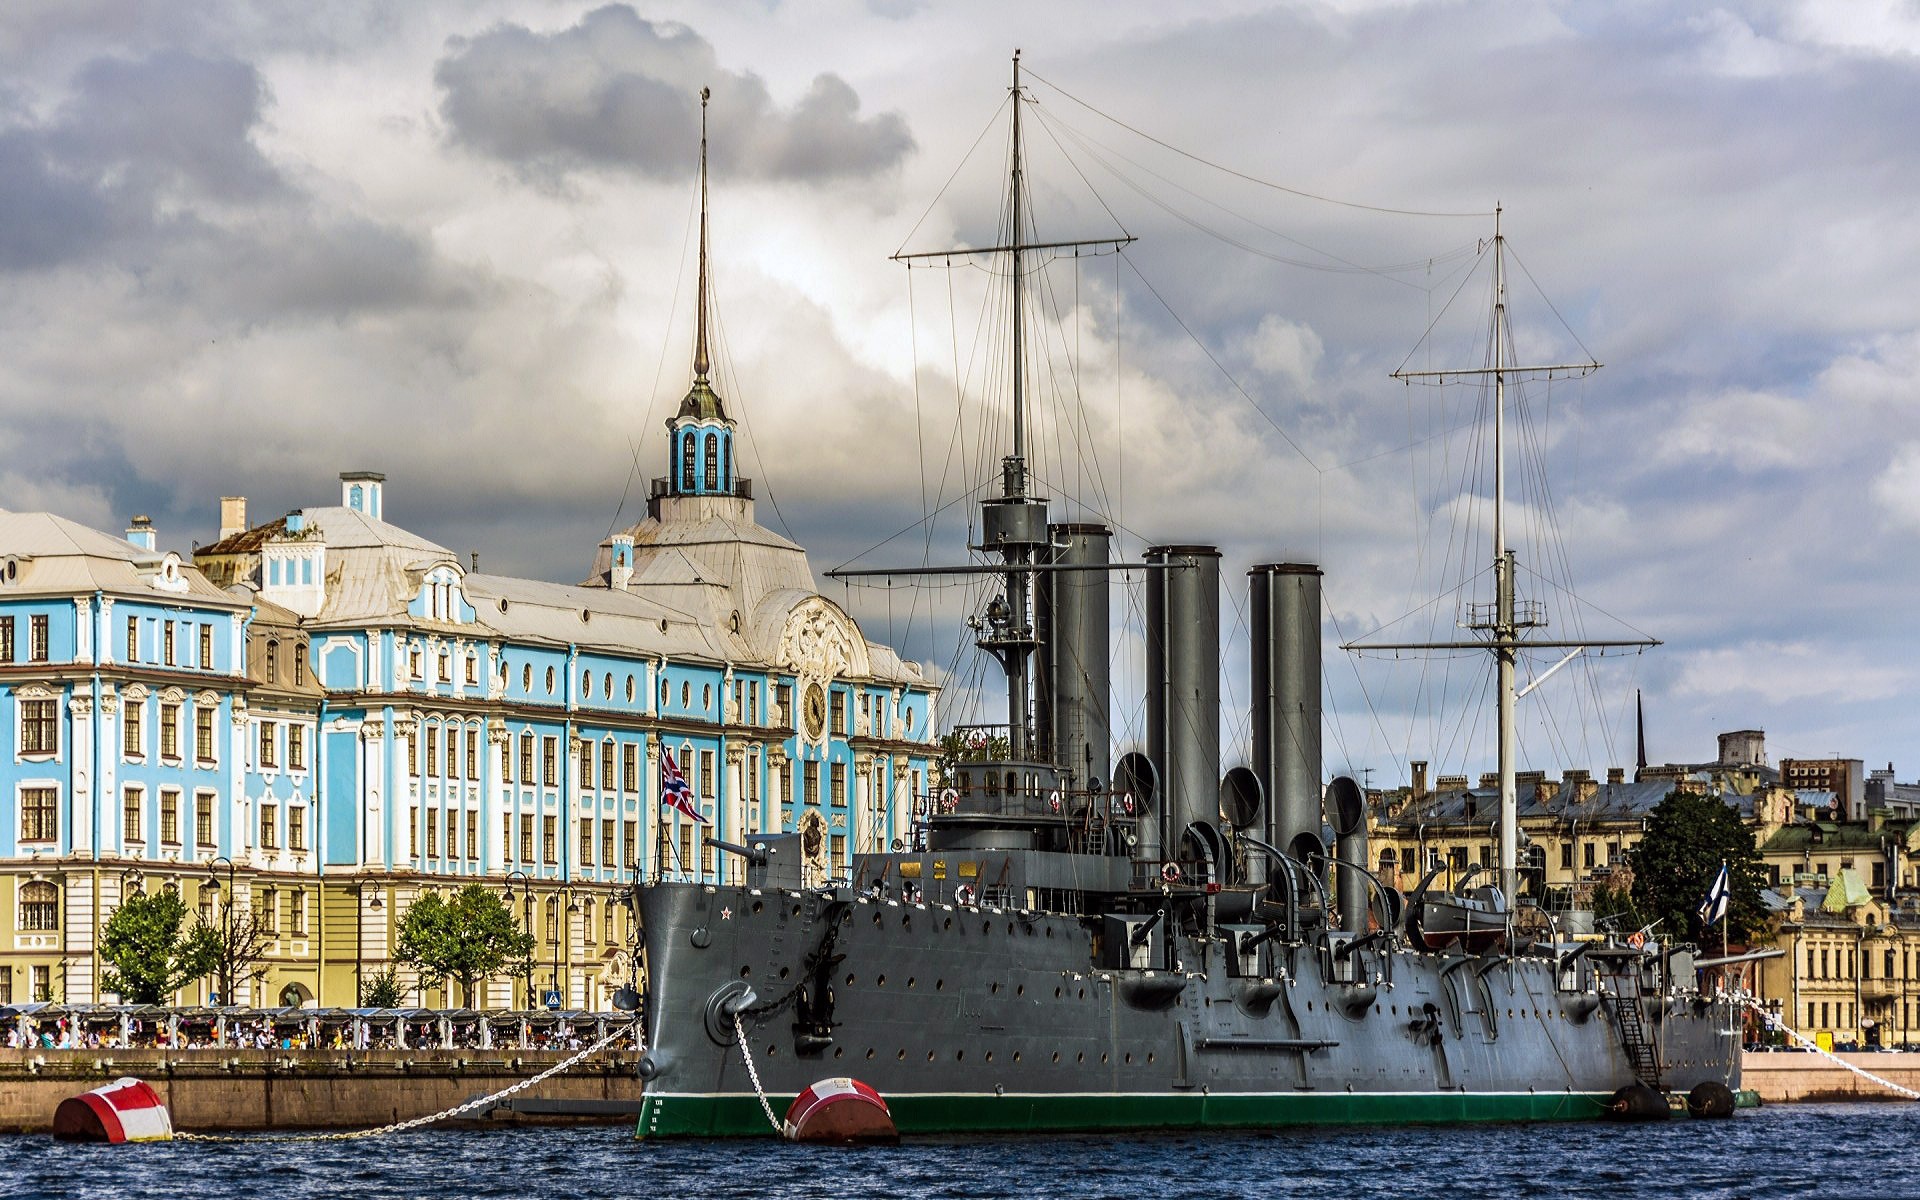 Ship Clouds Water Aurora St Petersburg Russia Building Shipyard Chains Flag City Battleships Old Bui 1920x1200